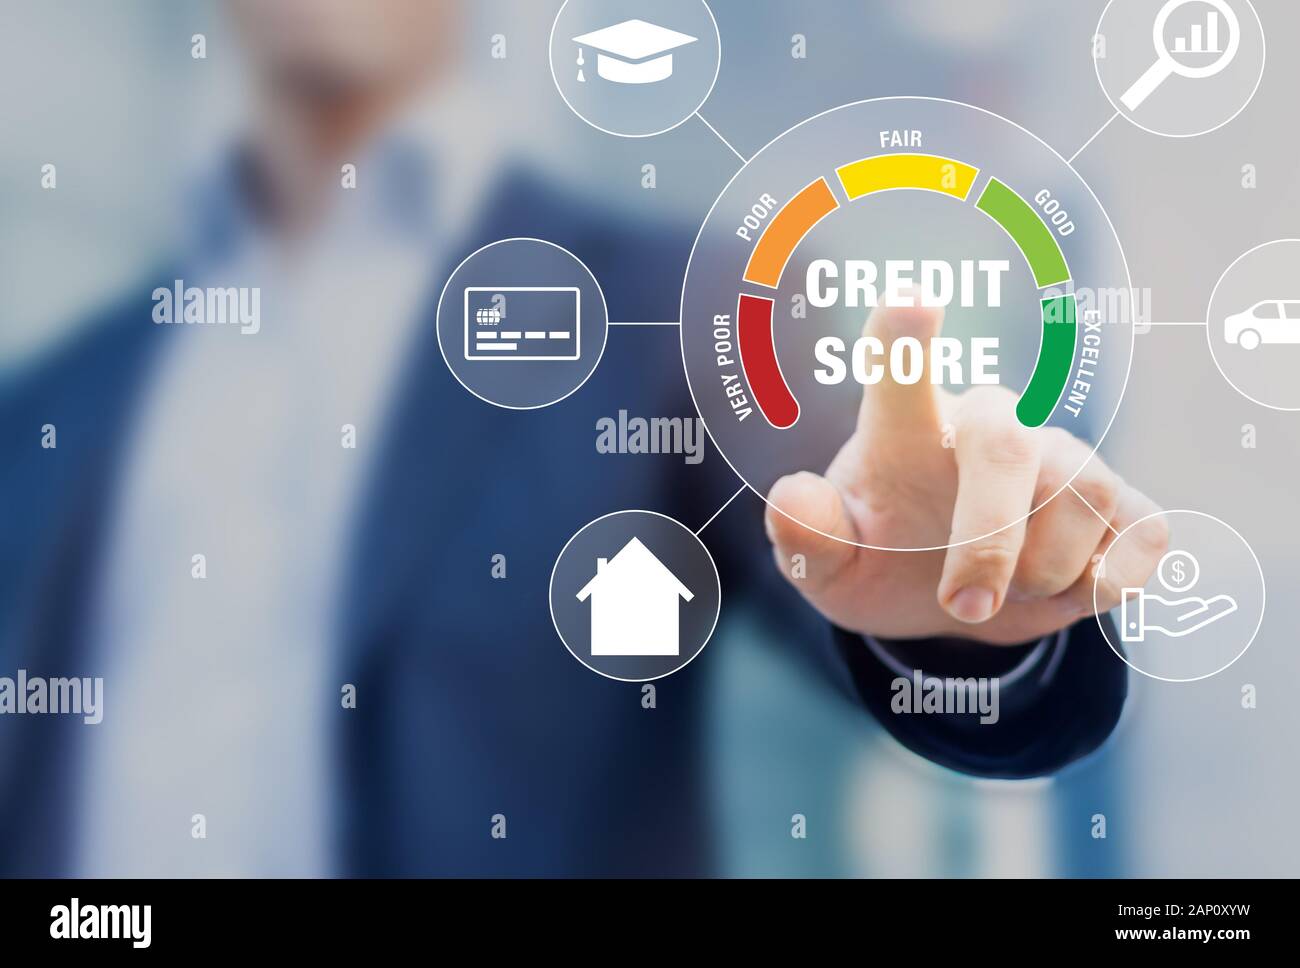 Credit Score rating based on debt reports showing creditworthiness or risk of individuals for student loan, mortgage and payment cards, concept with b Stock Photo